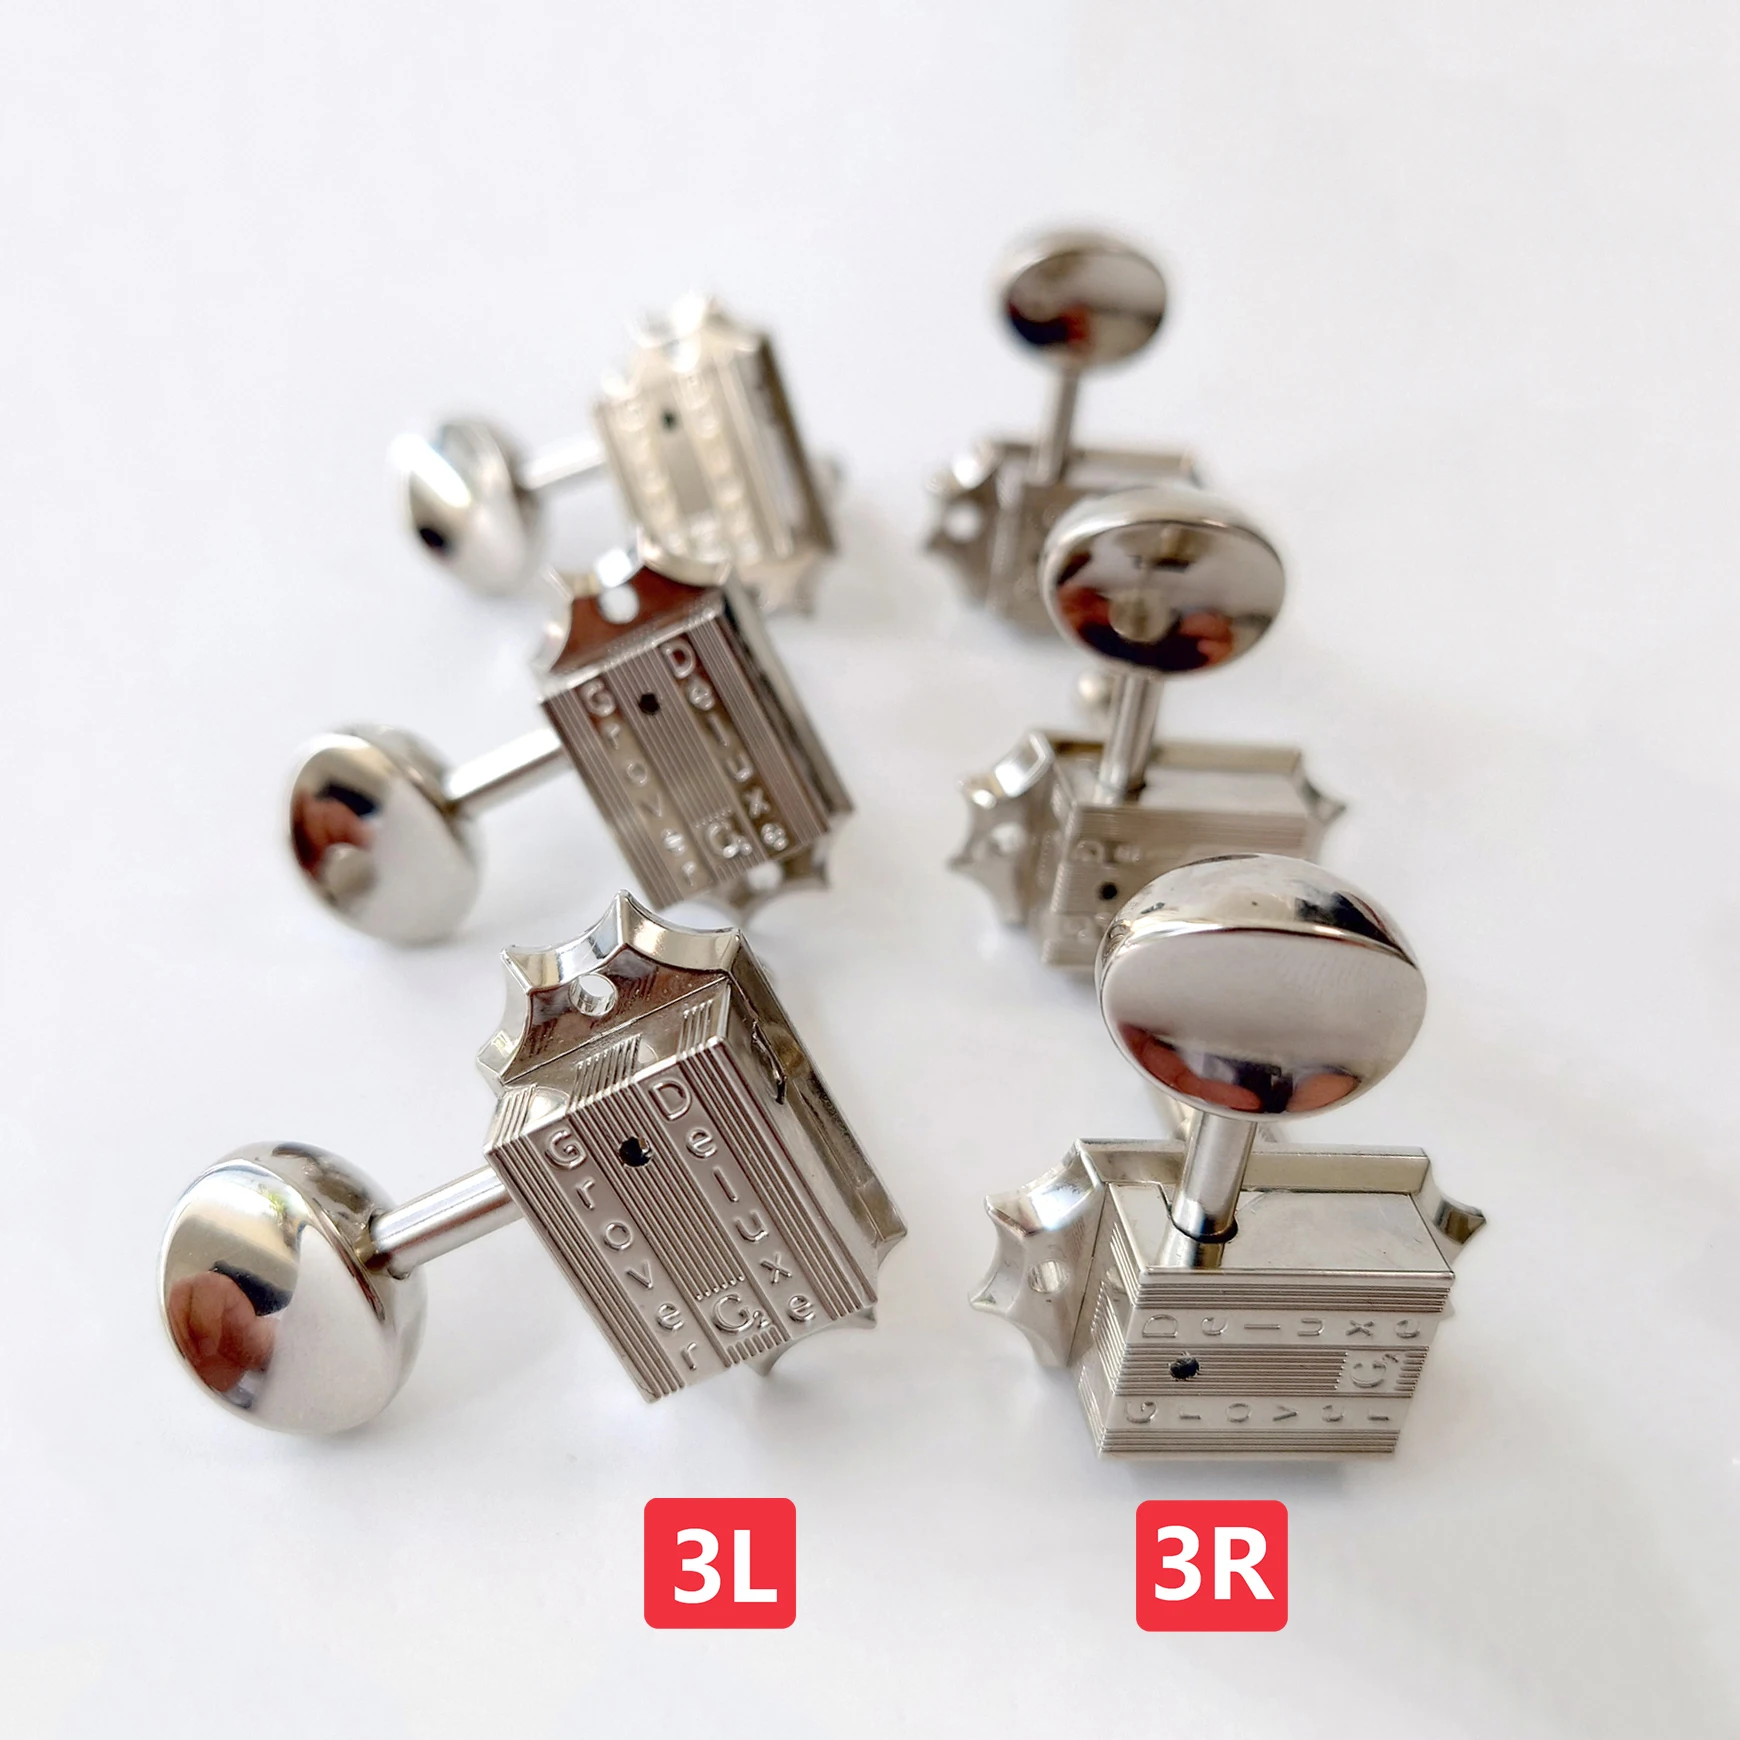 

3L 3R Guitar Tuners 1 Set Deluxe Guitar Machine Heads Tuners Chrome for 6 String Guitar Chrome